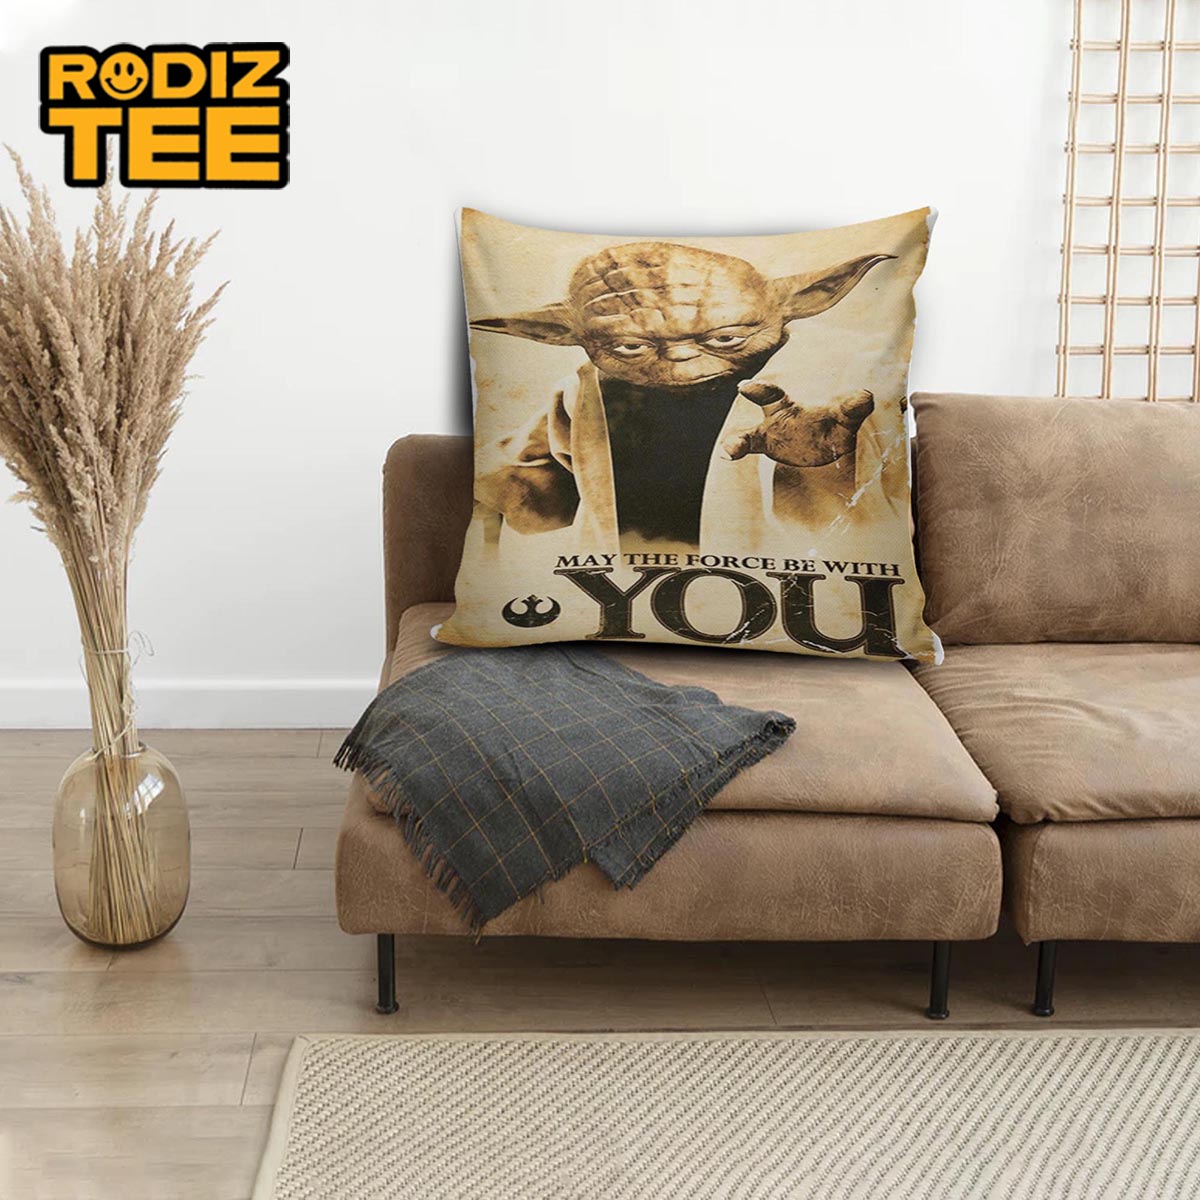 Star Wars Yoda May The Force Be With You Vintage Vibe Decorative Pillow